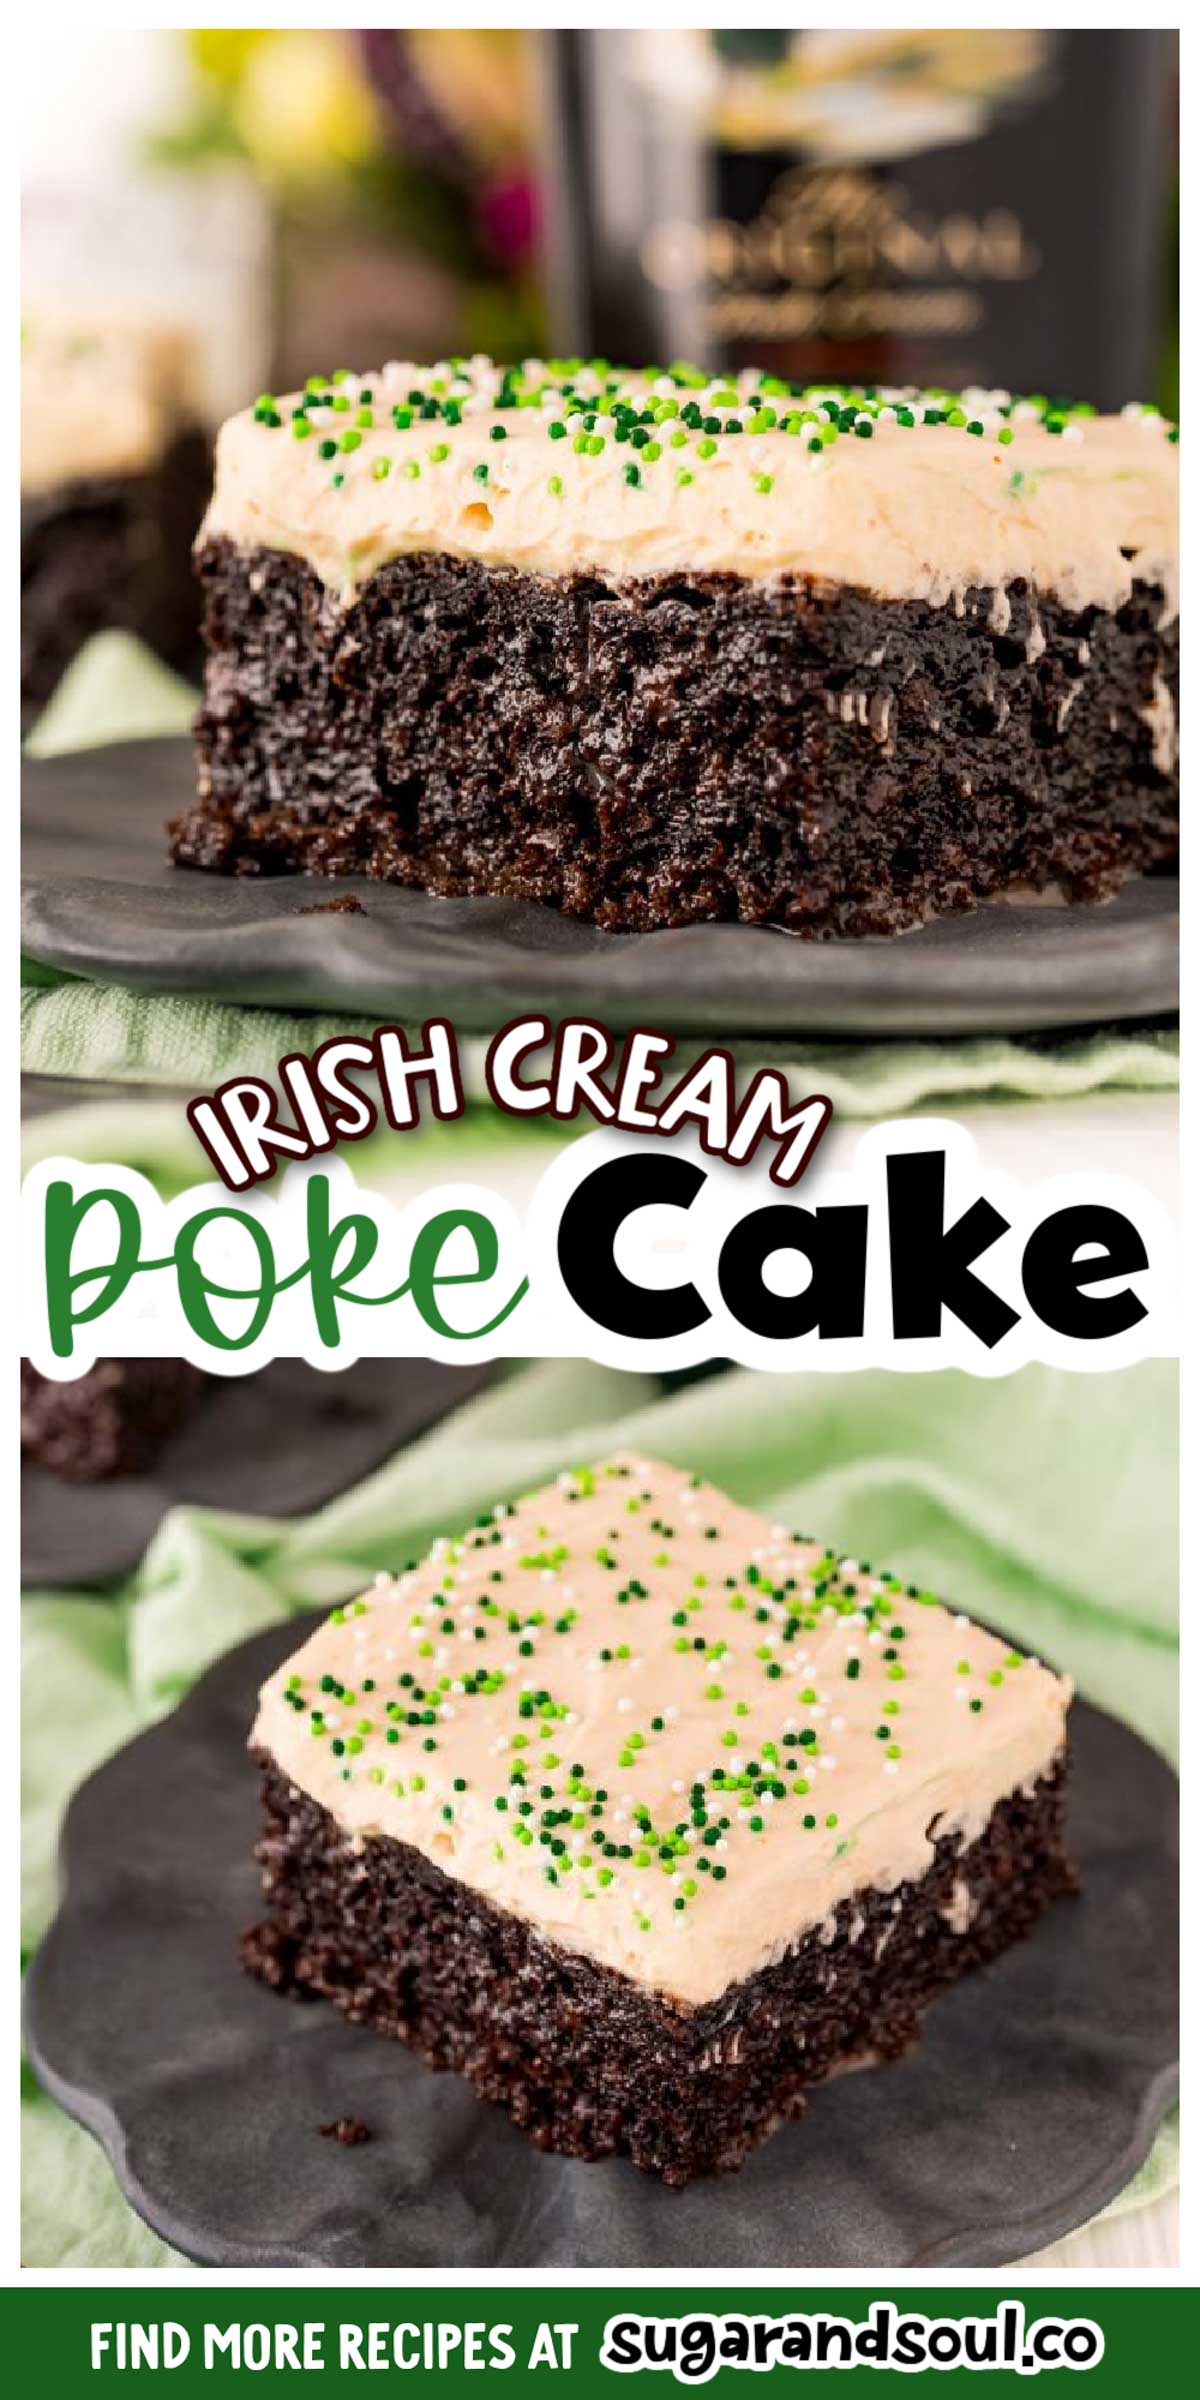 Chocolate Irish Cream Cake is made with a generous dose of Irish cream and topped with a fluffy, pudding-based frosting. This grown-up dessert is moist, rich, and oh-so-boozy! via @sugarandsoulco